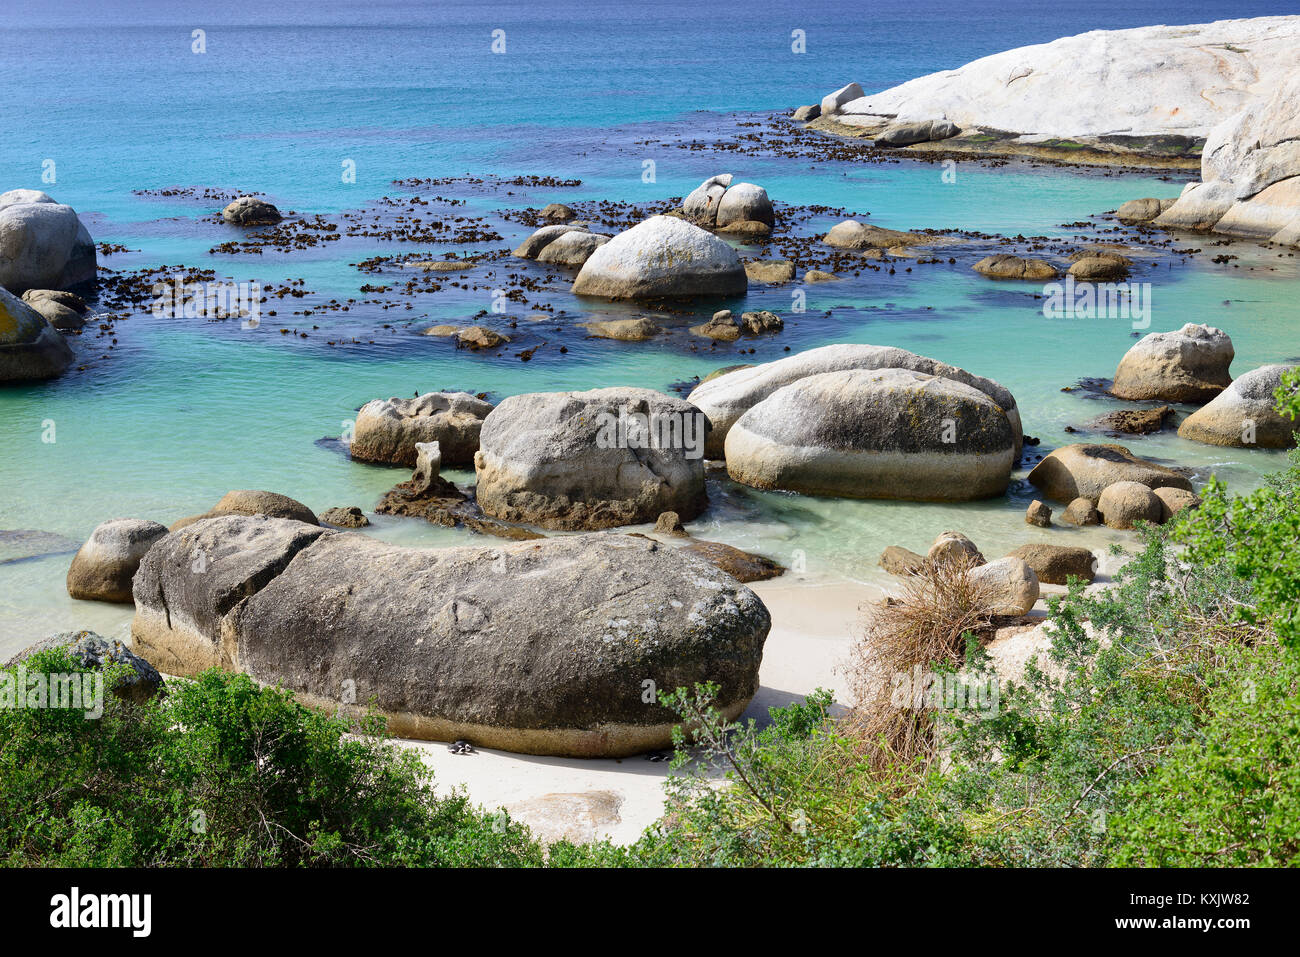 Boulders beach with Colony of African penguins (Spheniscus demersus) in background, Simons Town, South Africa, Indian Ocean Stock Photo